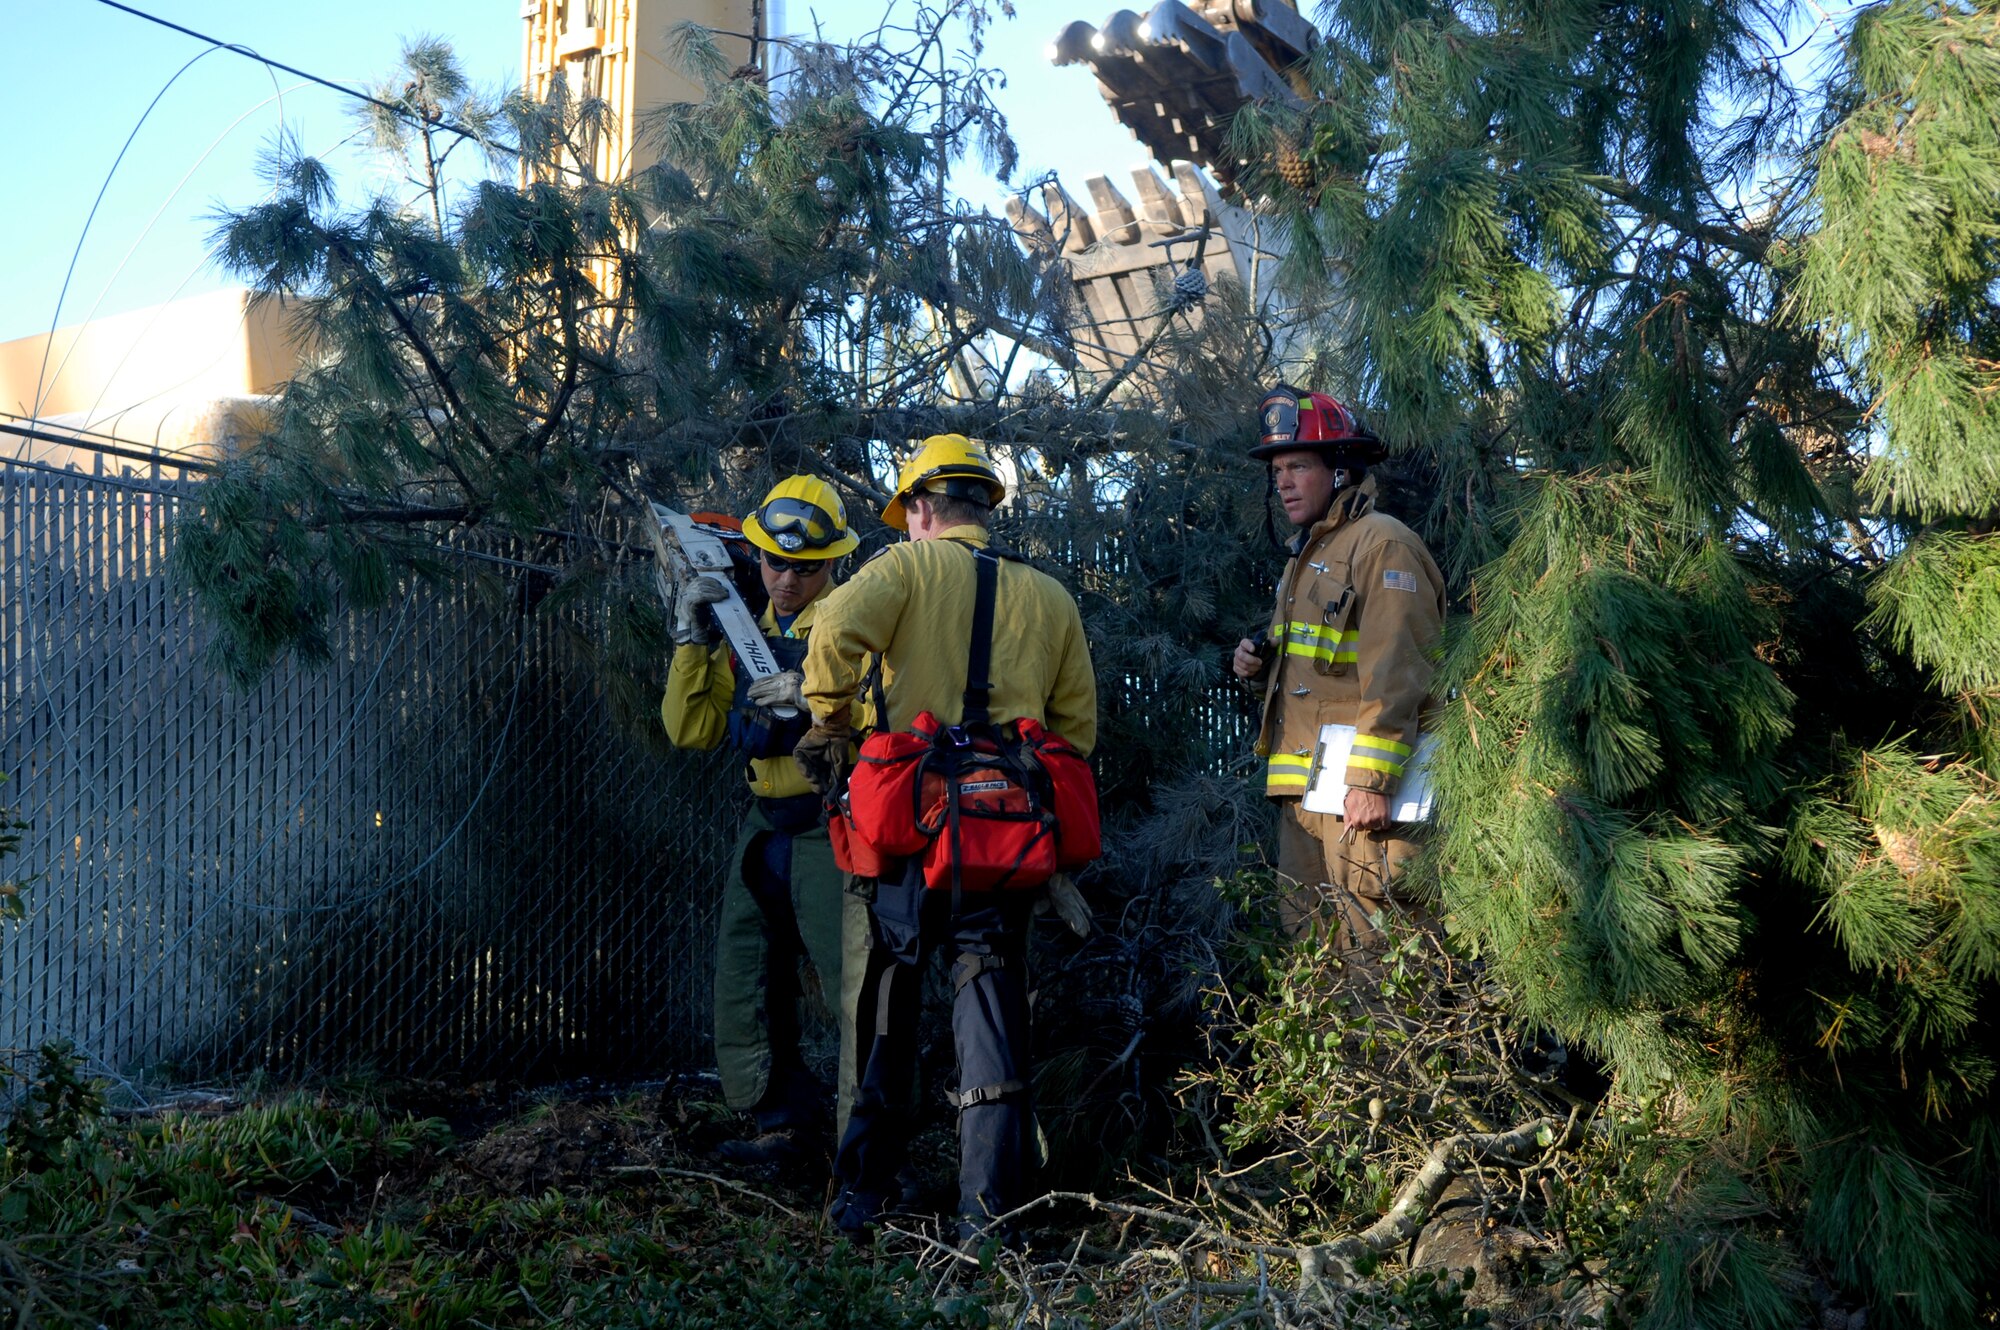 VANDENBERG AIR FORCE BASE, Calif.-- Vandenberg firefighters clean up debris after a tree fell on a power line in base housing. (U.S. Air Force Photo/Airman 1st Class Antoinette Lyons) 